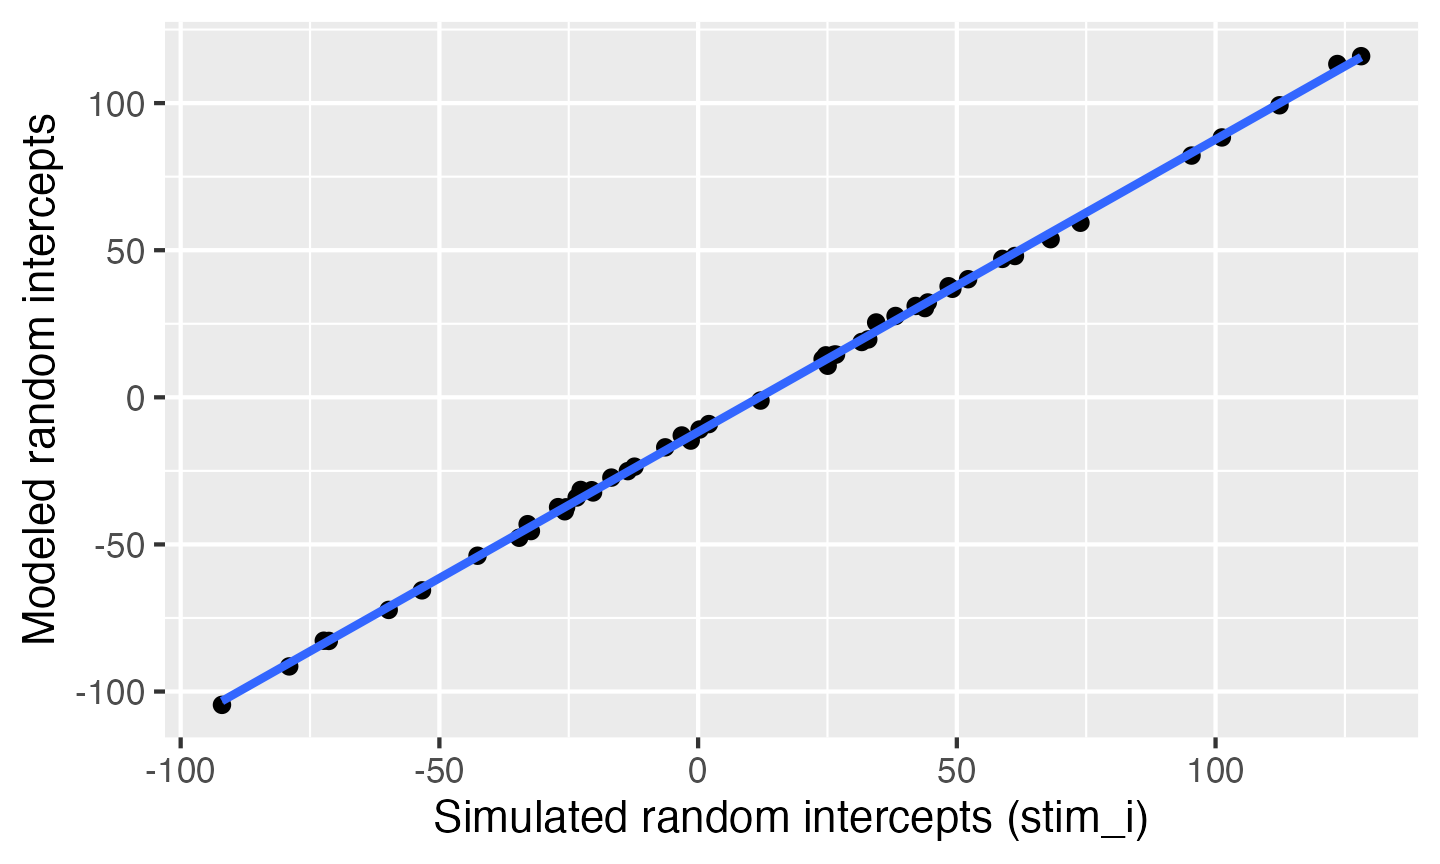 Compare simulated stimulus random intercepts to those from the model